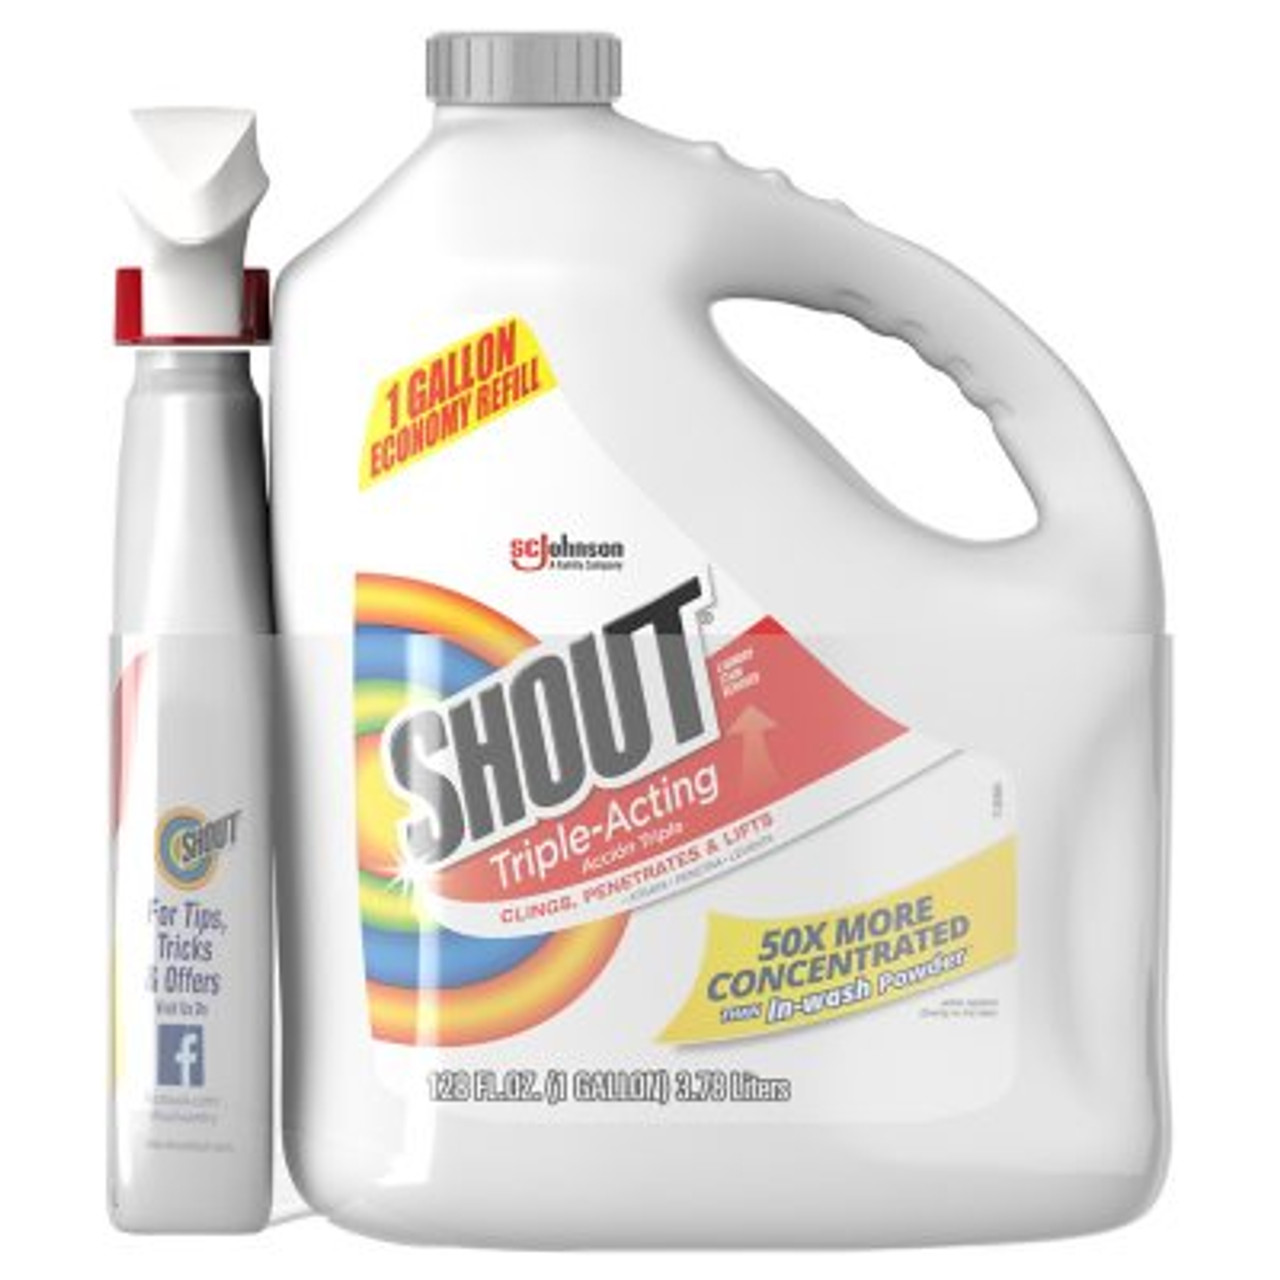 Shout Triple-Acting Laundry Stain Remover (128 fl. oz. refill + 22 fl. oz. trigger) - [From 54.00 - Choose pk Qty ] - *Ships from Miami